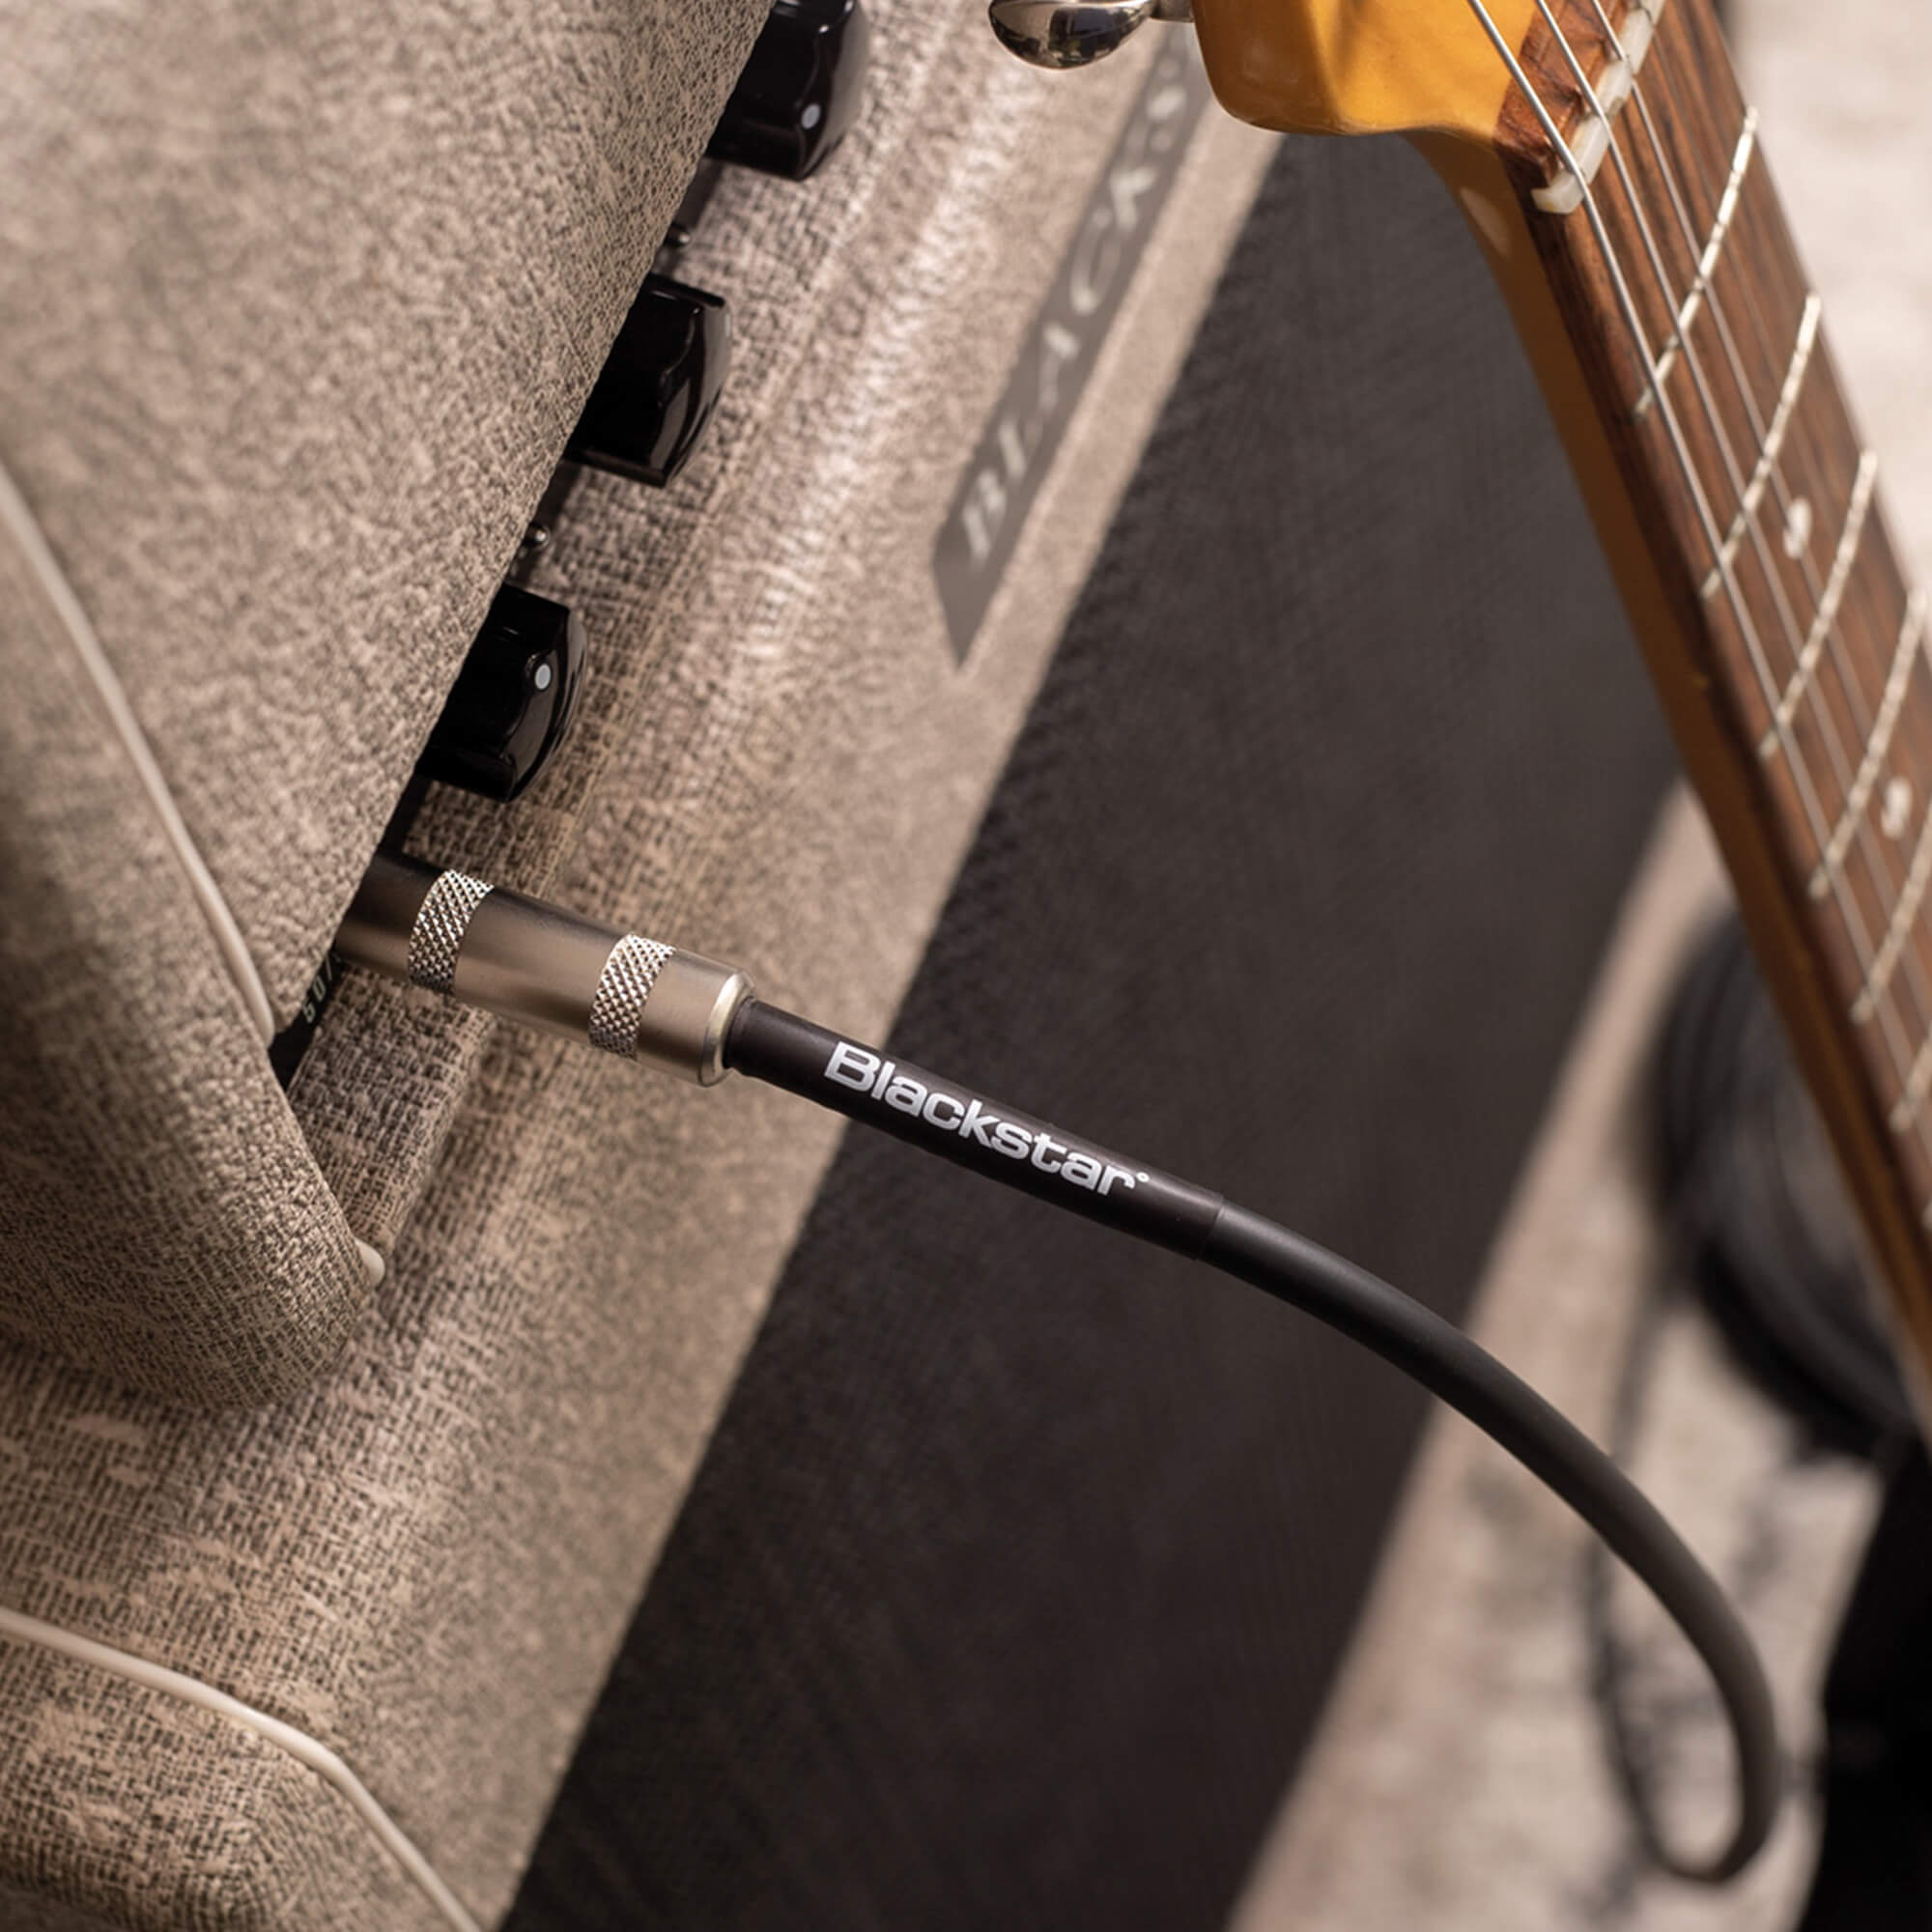 Blackstar Amps instrument cable plugged into an amplifier